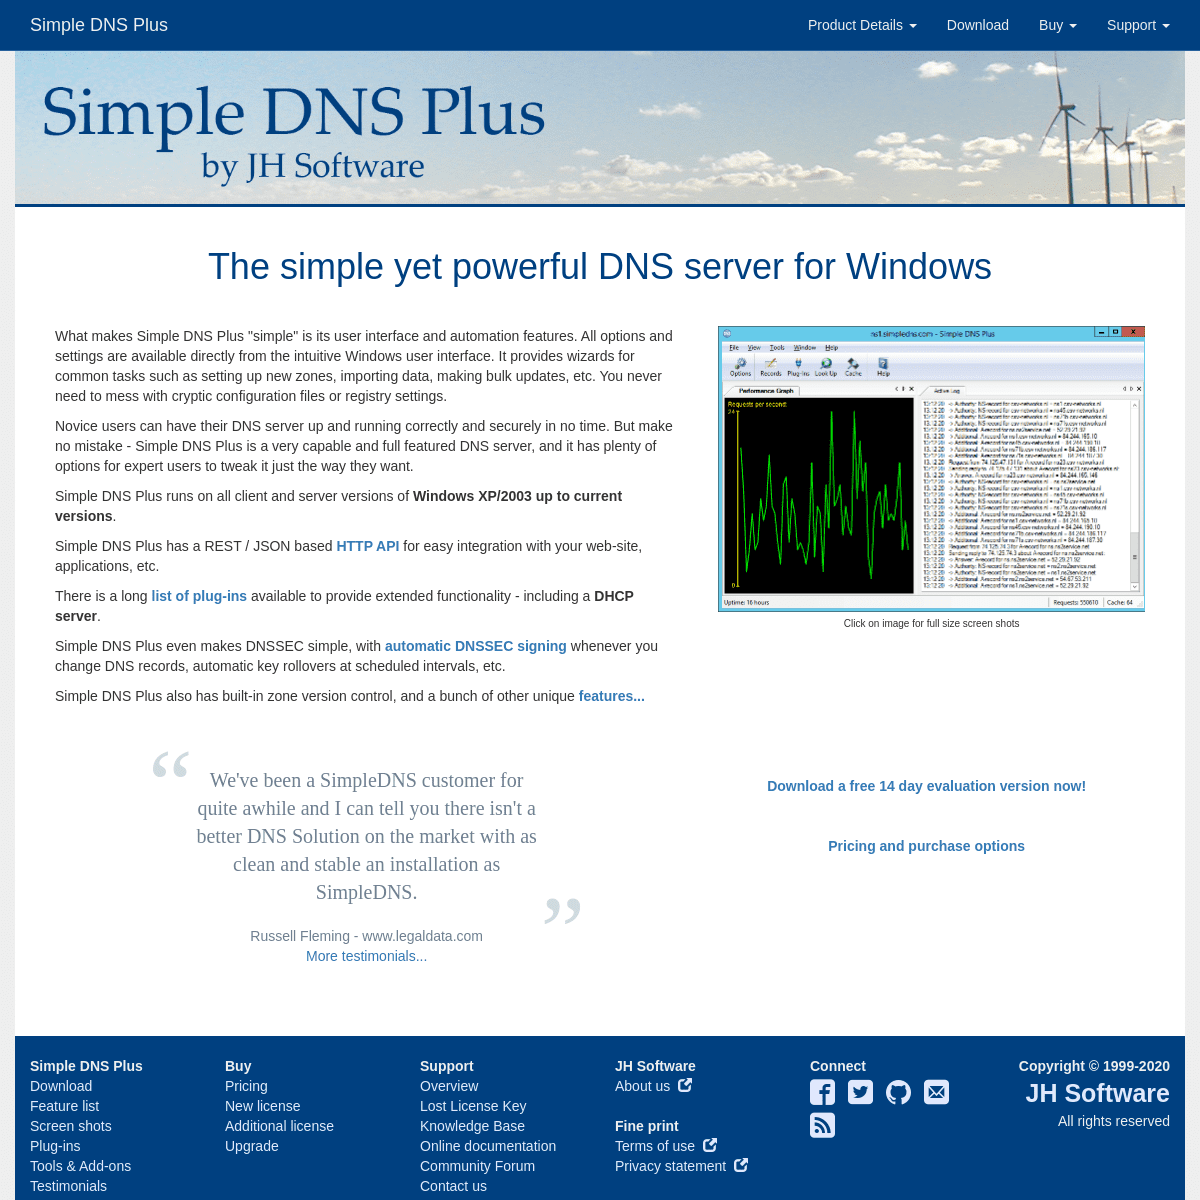 A complete backup of simpledns.com